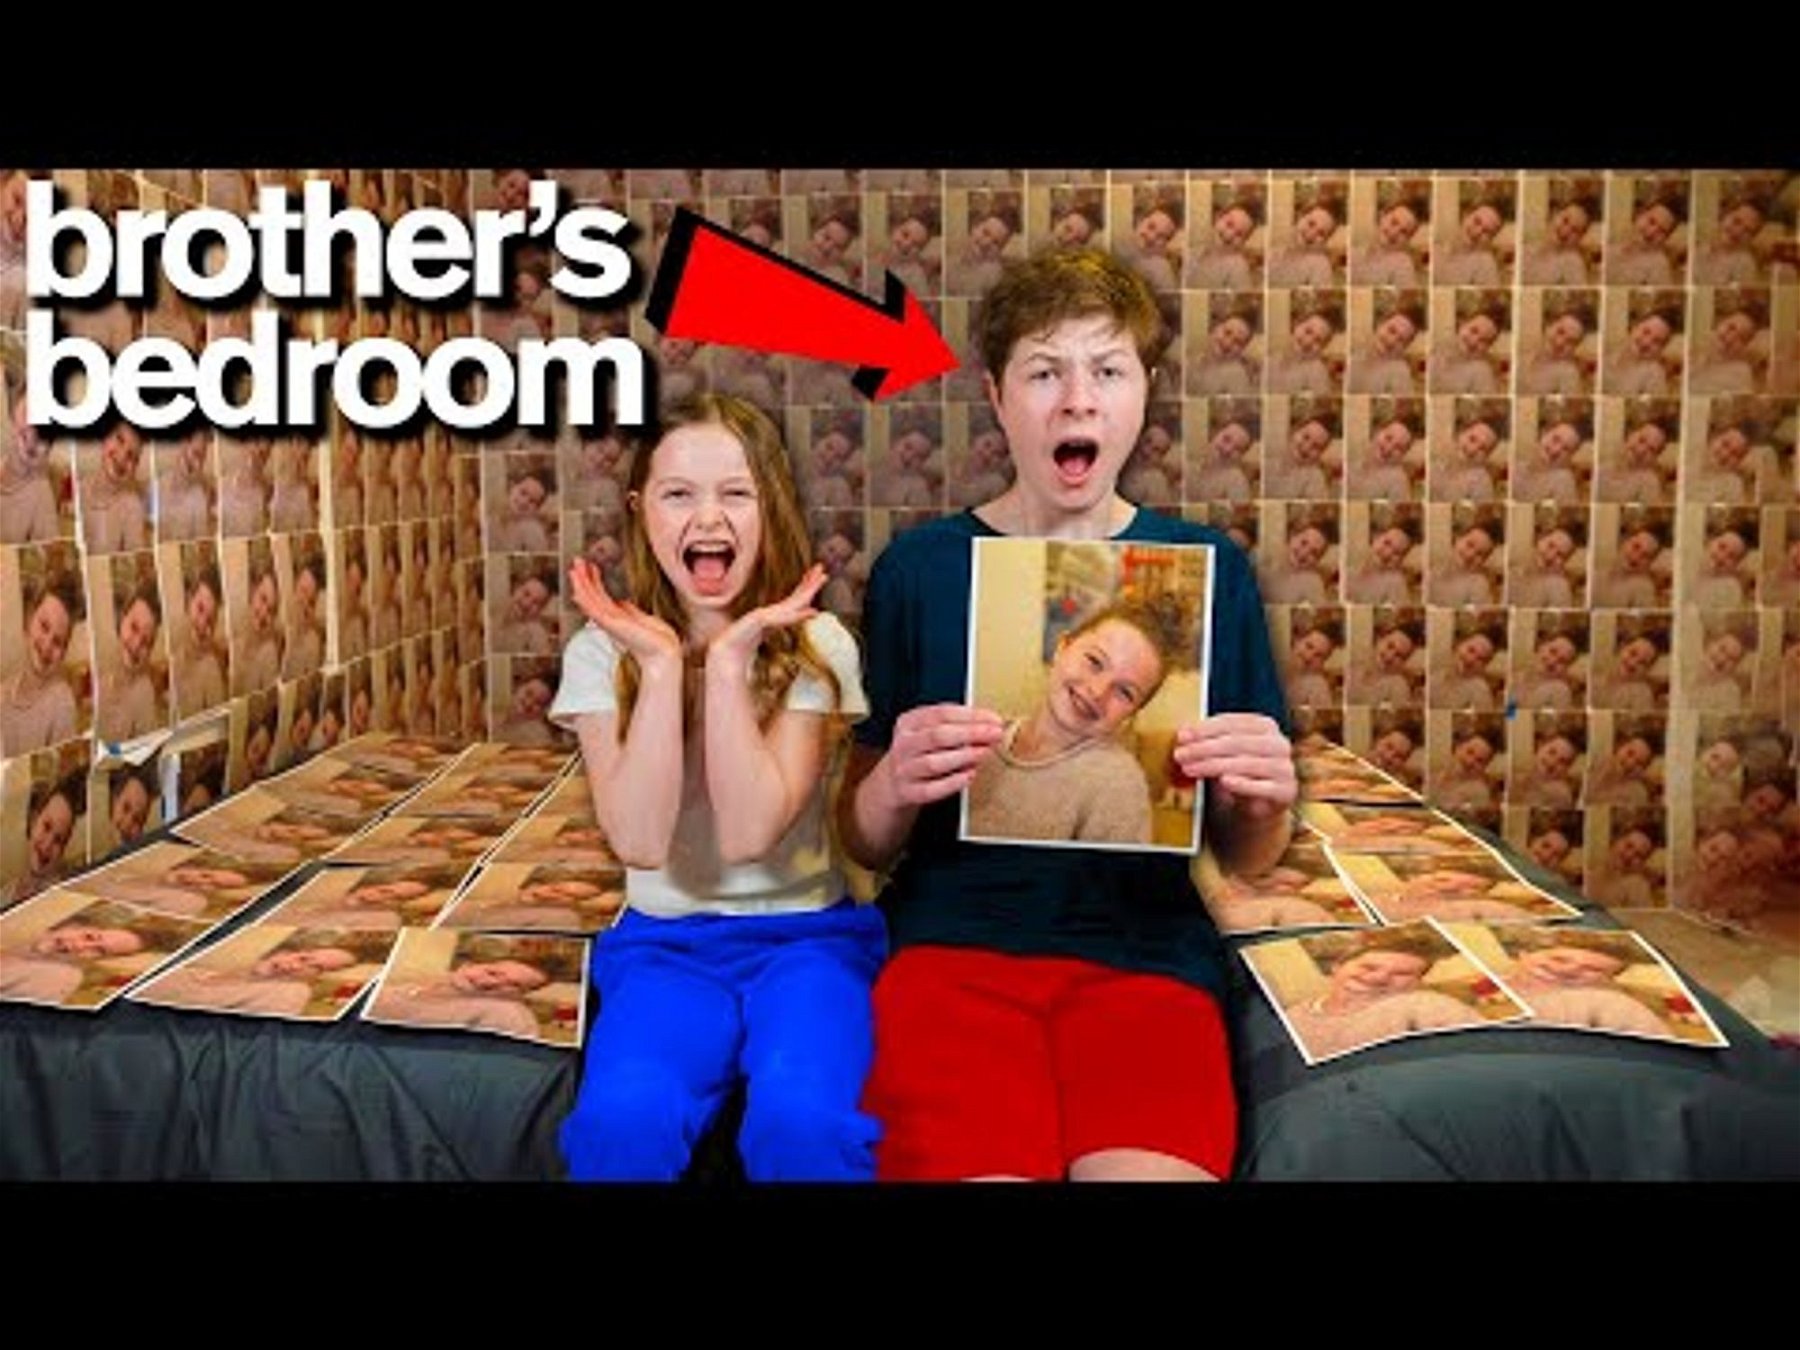 LITTLE SISTER PRANKS BROTHER FOR 24 HOURS